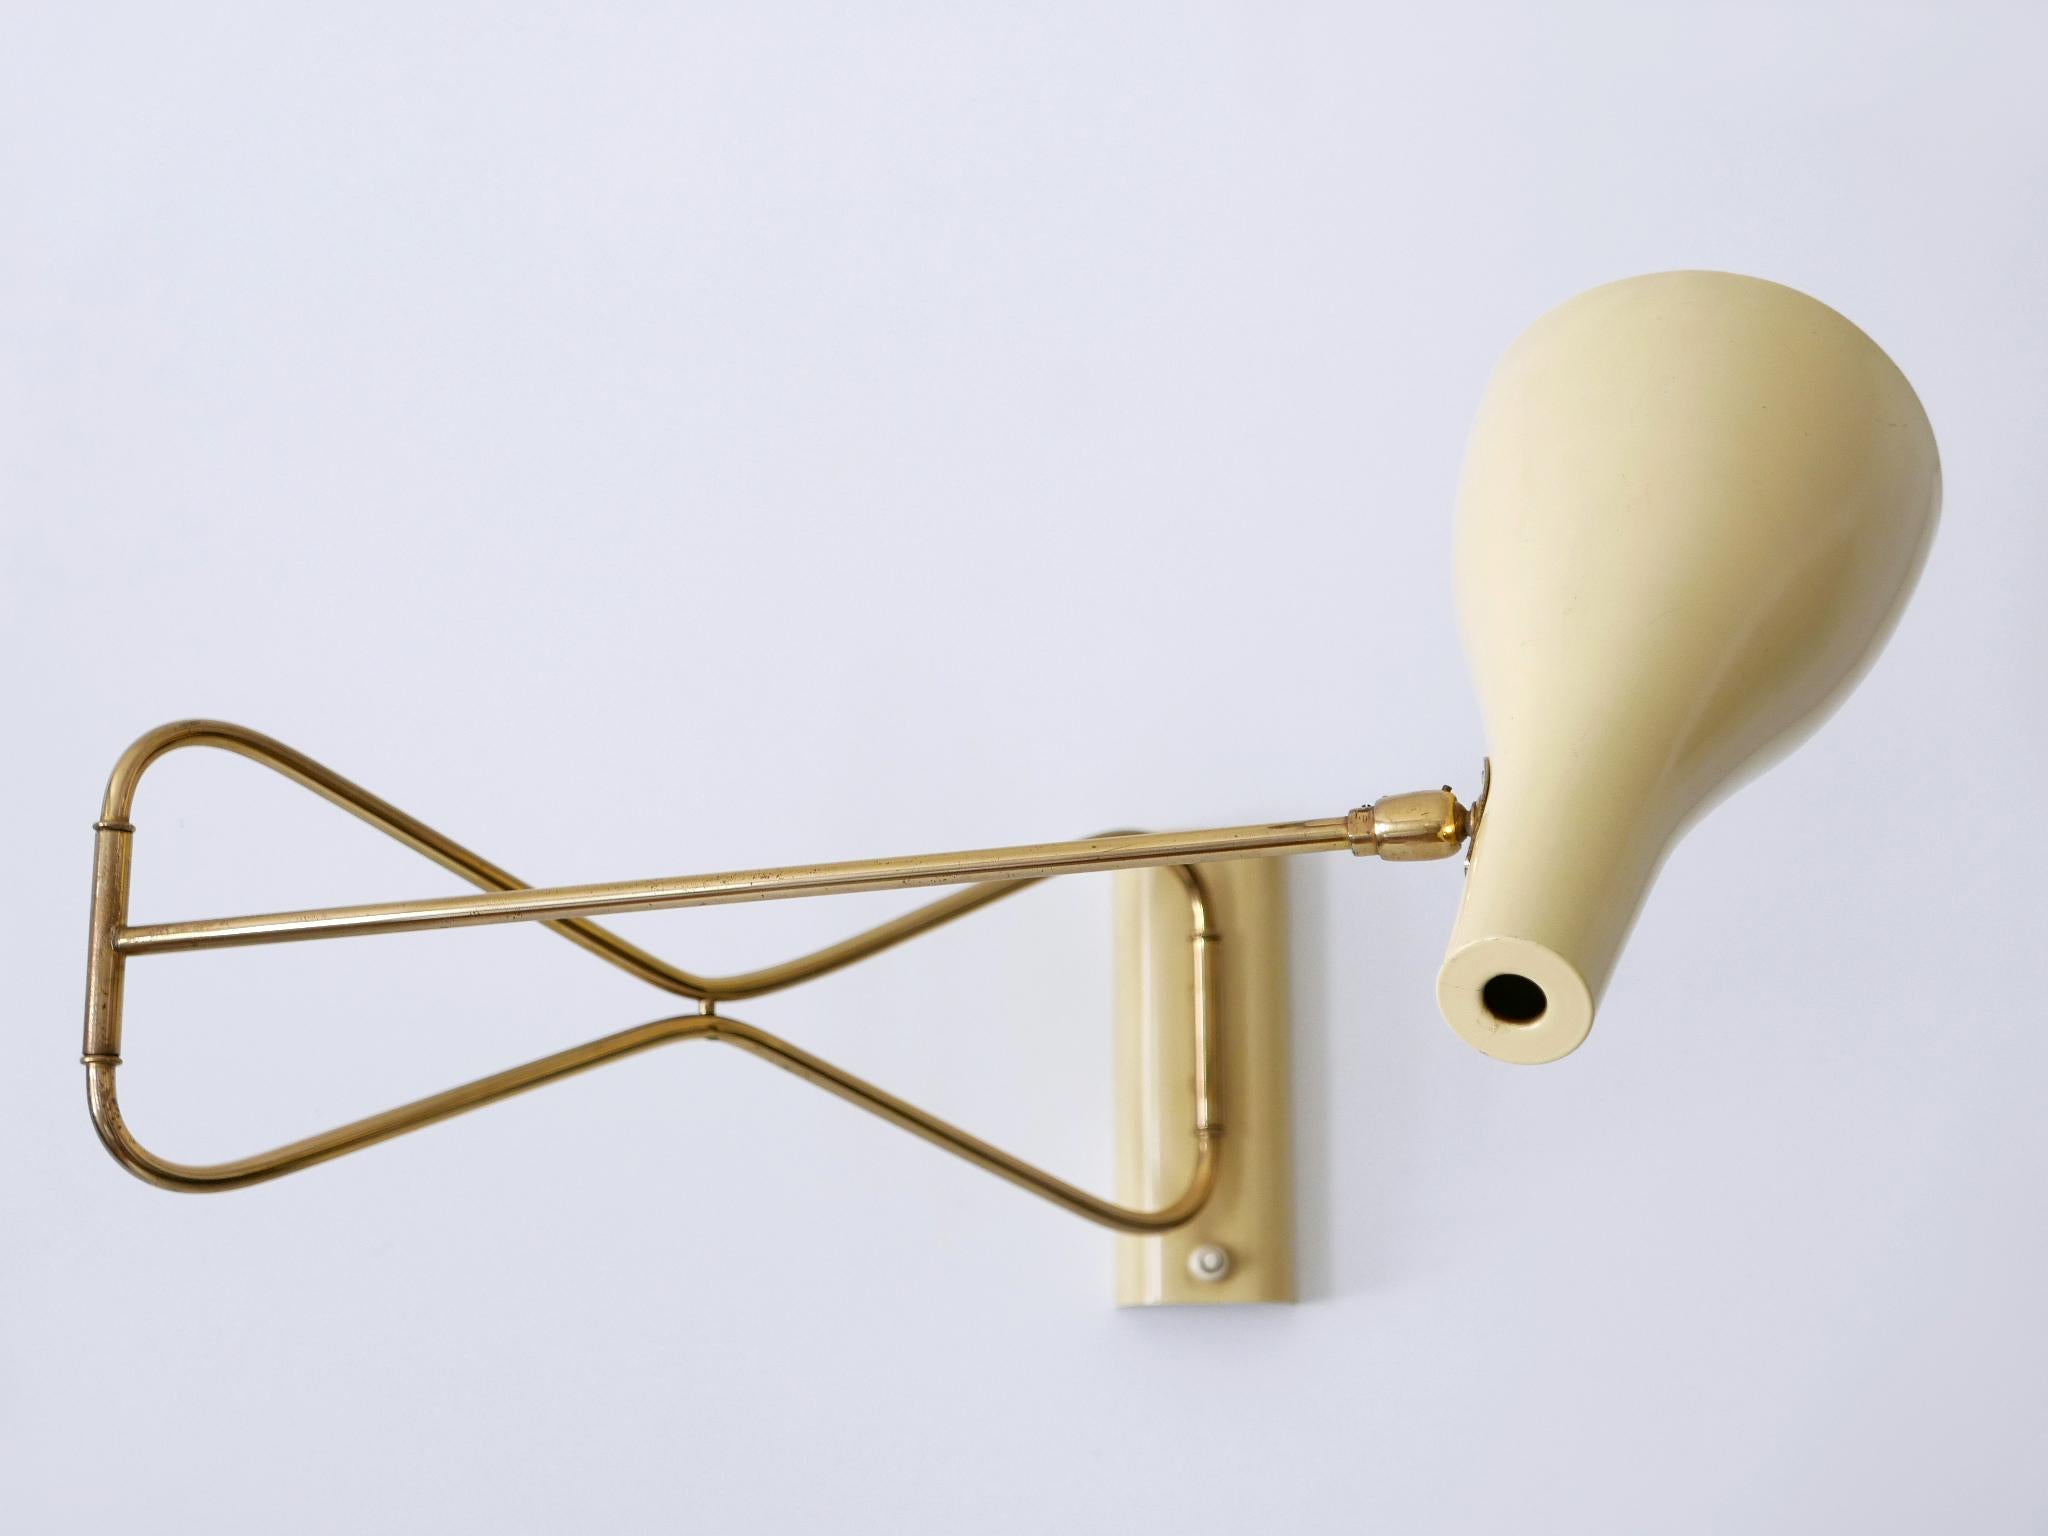 Rare & Elegant Mid Century Modern Wall Lamp '9590/28' by Cosack Germany 1950s For Sale 4